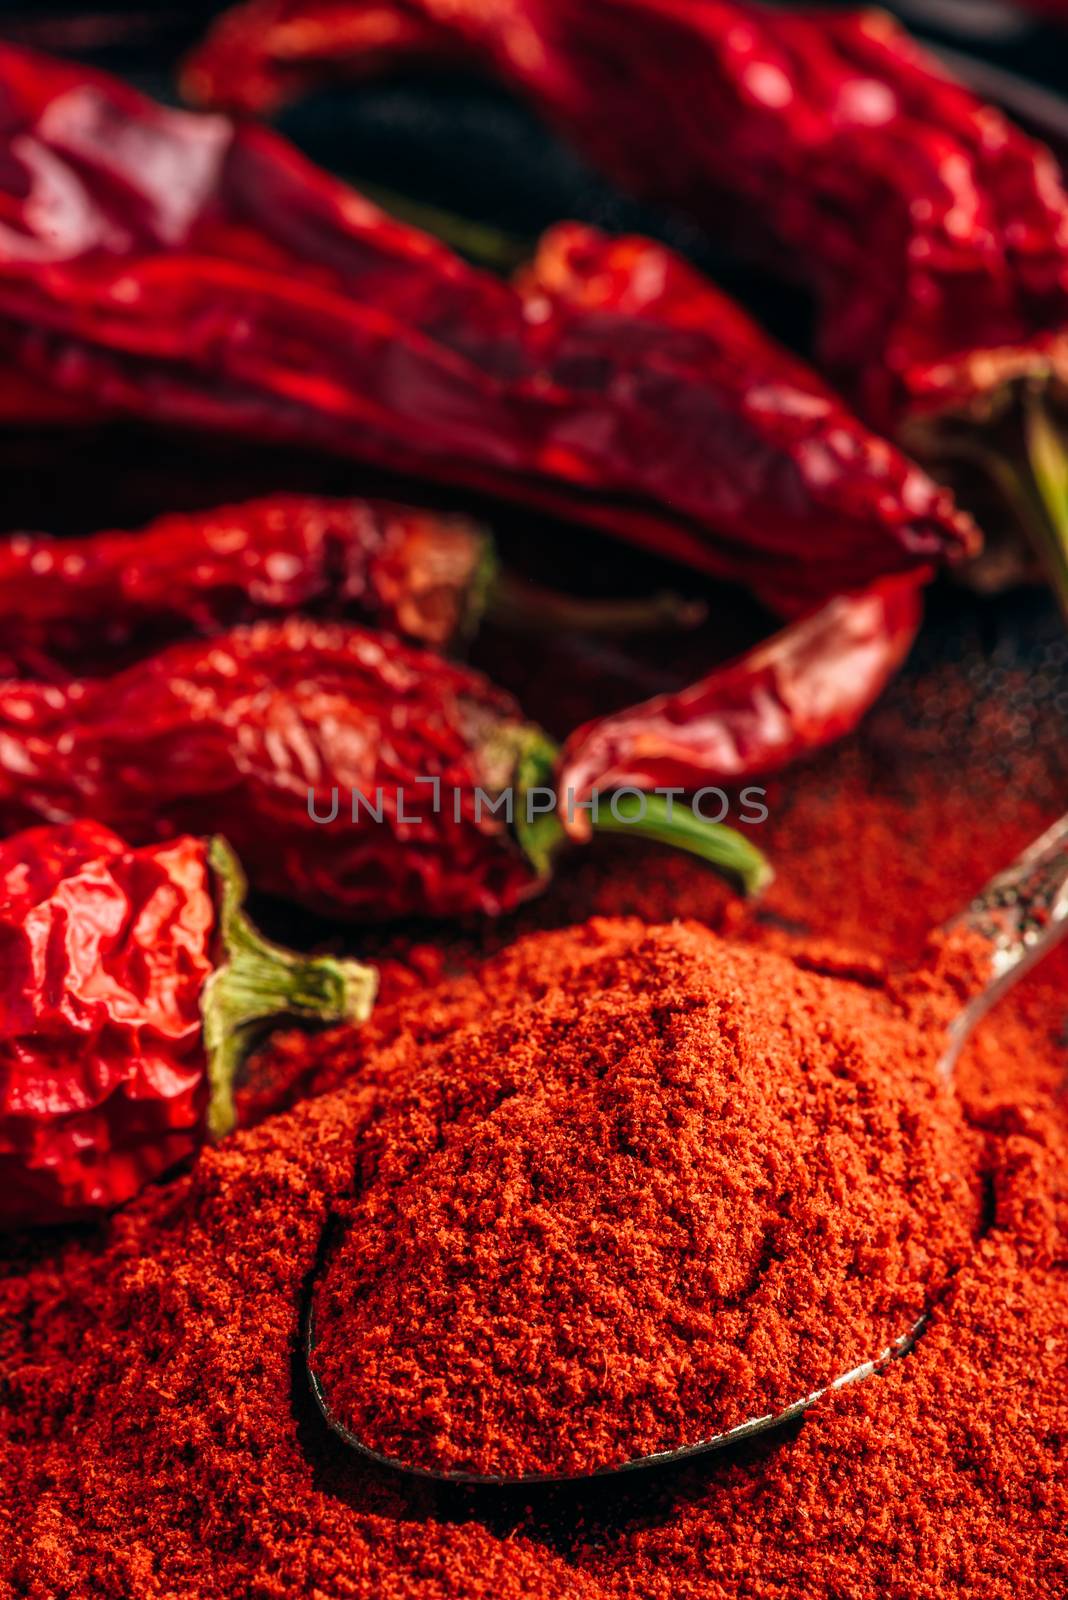 Spoonful of ground red chili pepper by Seva_blsv